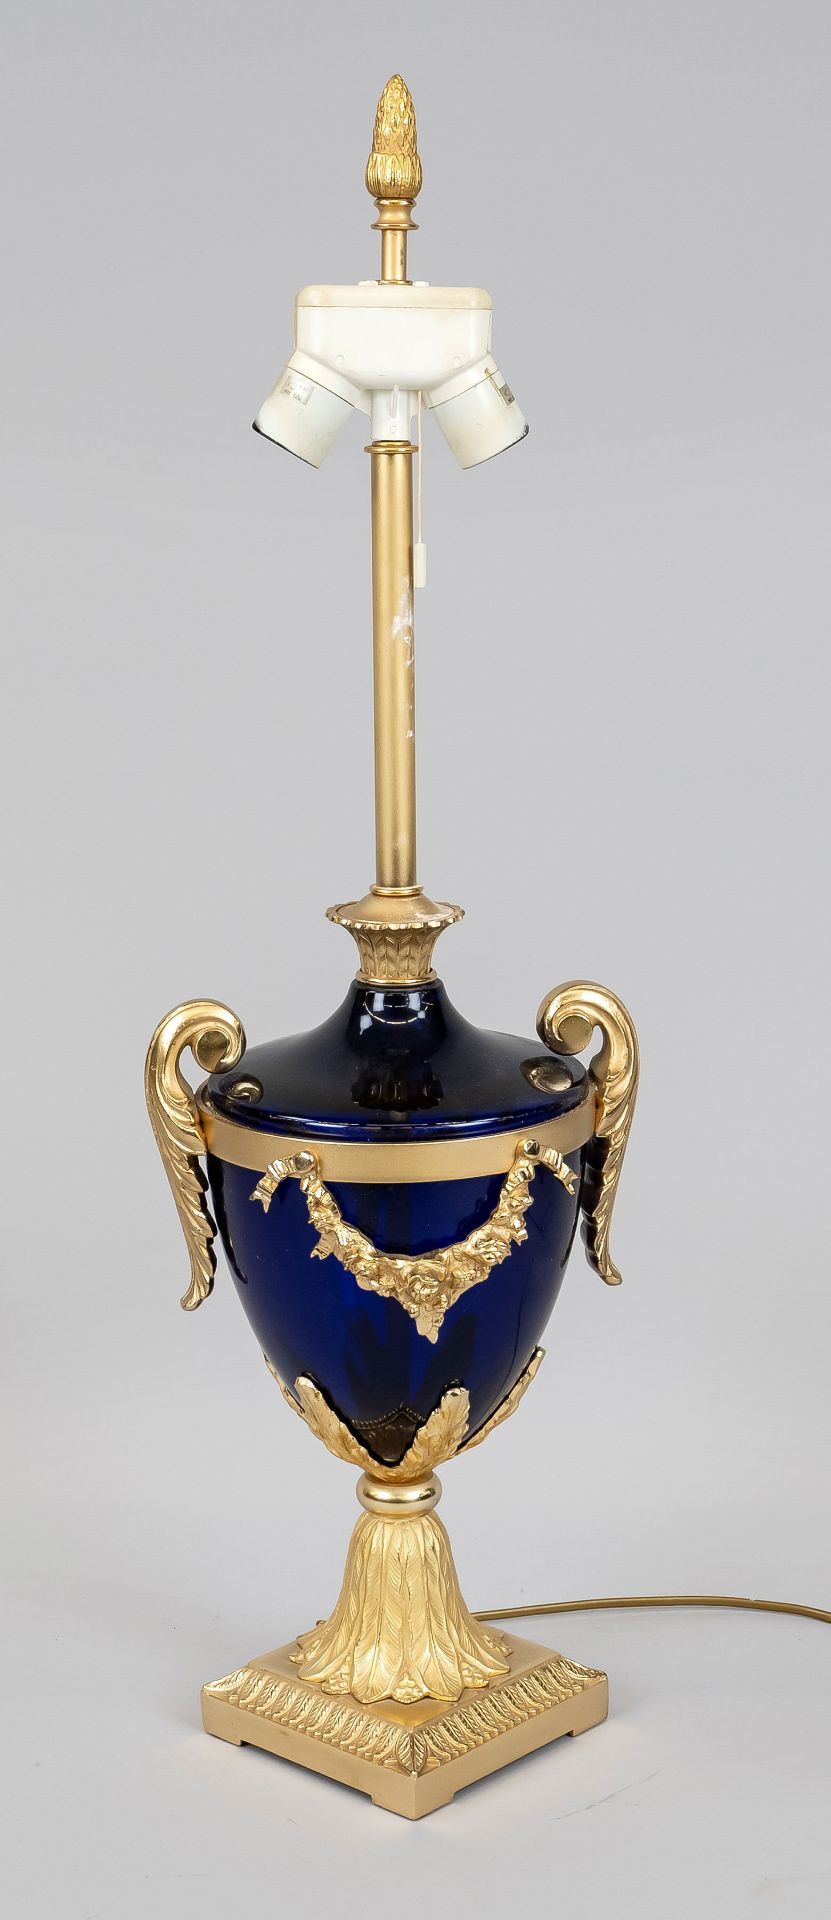 Vase lamp, 20th c., cobalt glass vase in ornamented brass frame, 2 lights, without shade, h. 85 cm